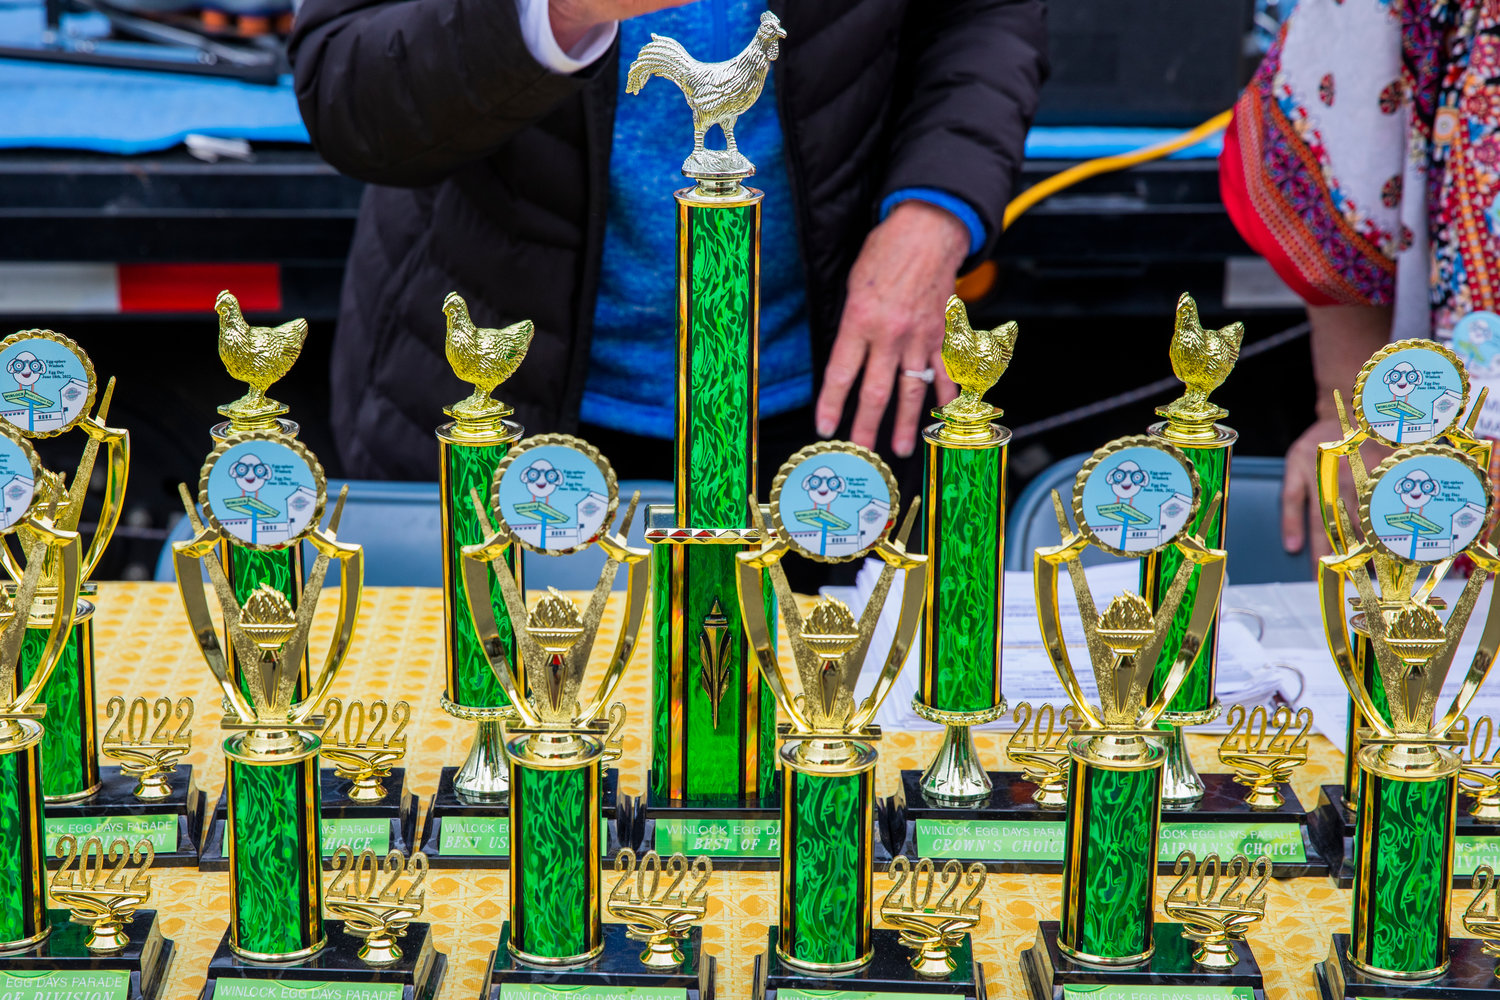 Trophies sit on display for the Egg Days Festival parade Saturday in Winlock.